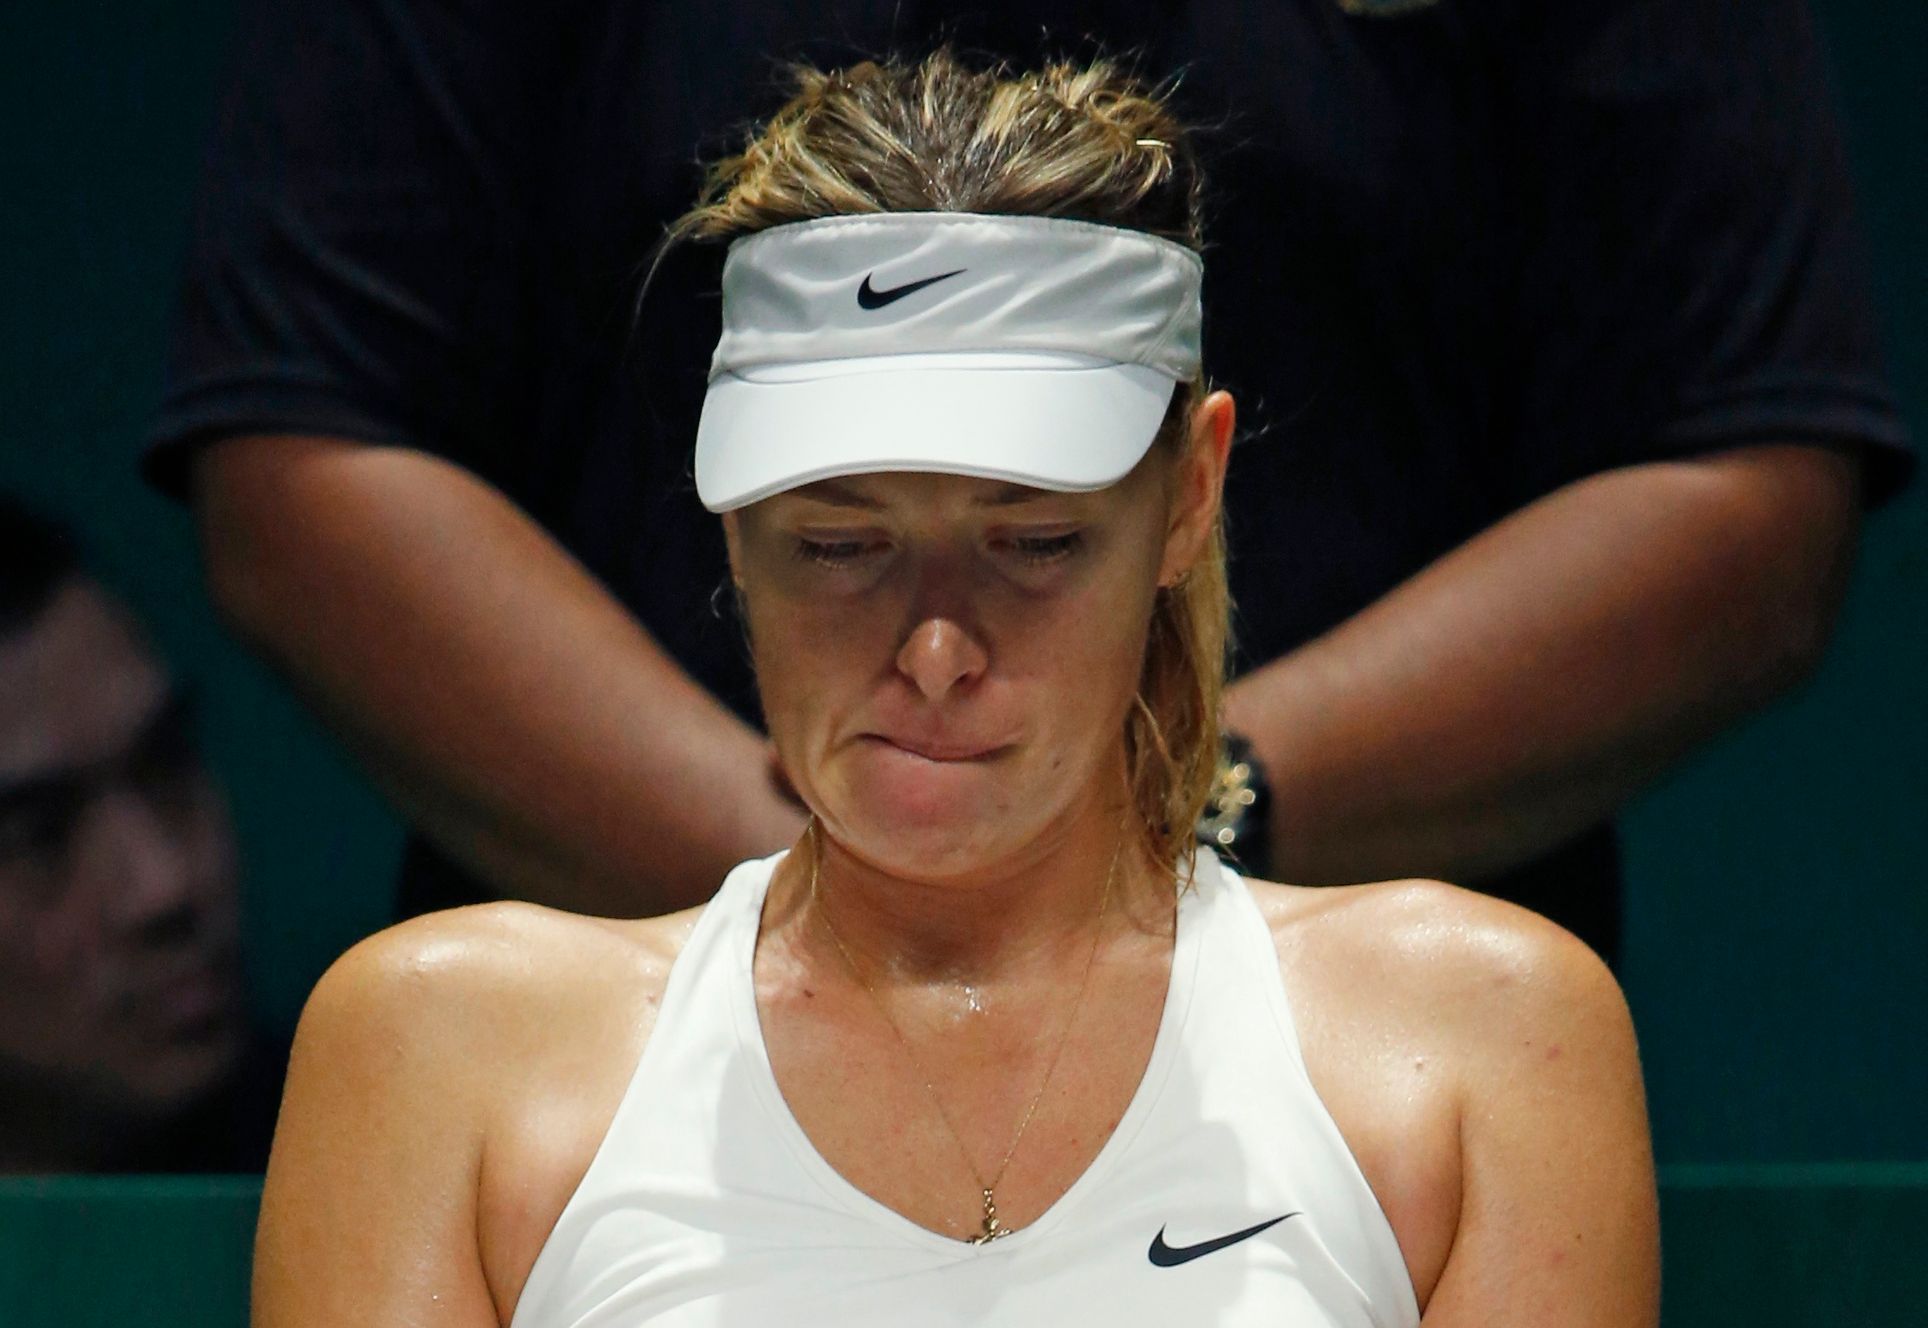 Maria Sharapova of Russia rests in between games in the second set against Petra Kvitova of the Czech Republic at the Singapore Indoor Stadium